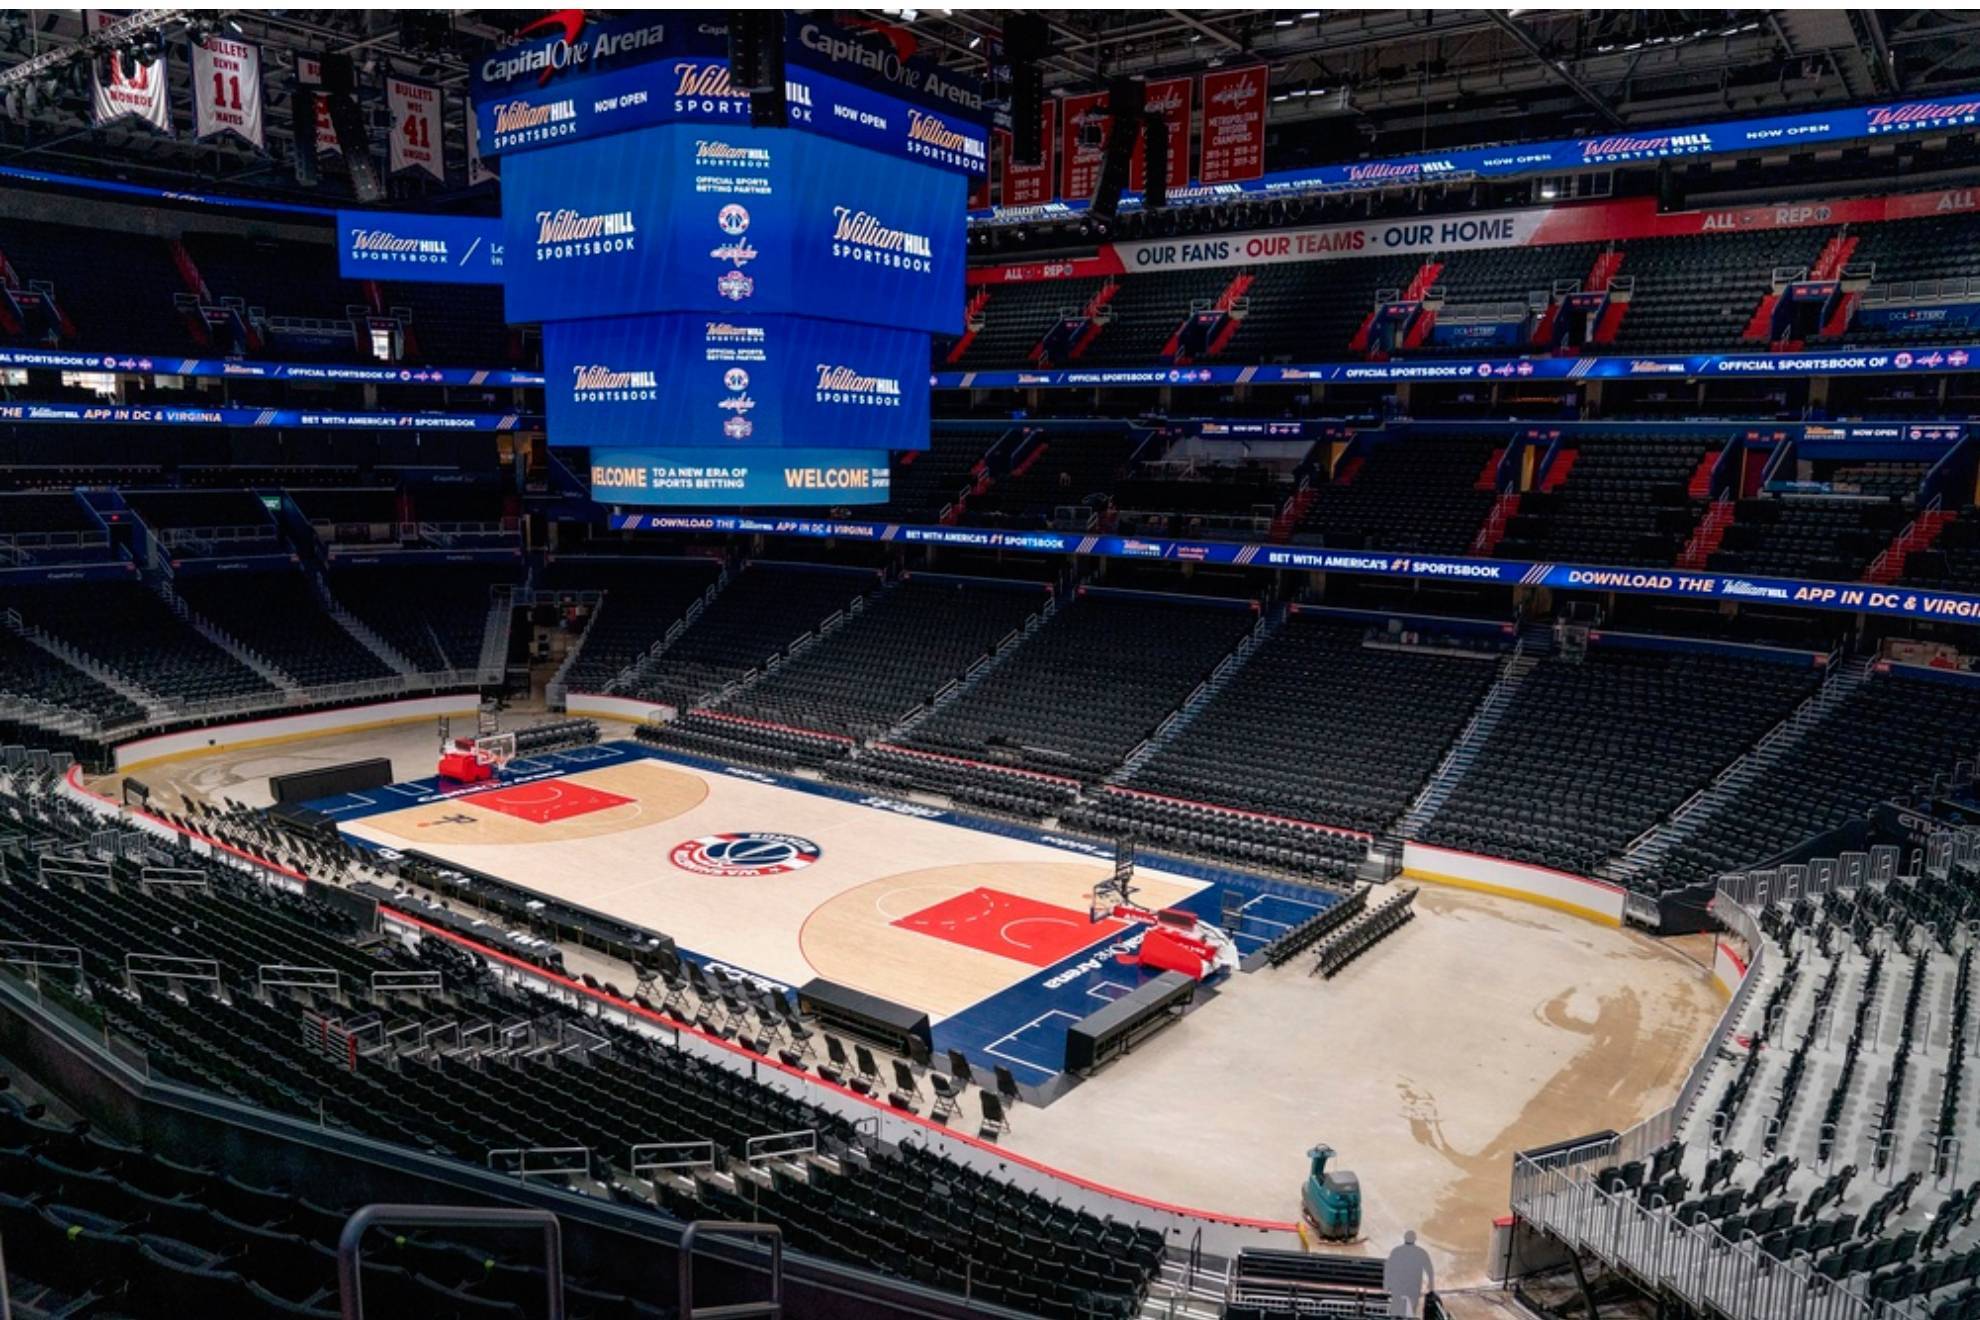 Screens display the William Hill Sportsbook logo at Monumental Sports & Entertainments Capital One Arena in Washington /